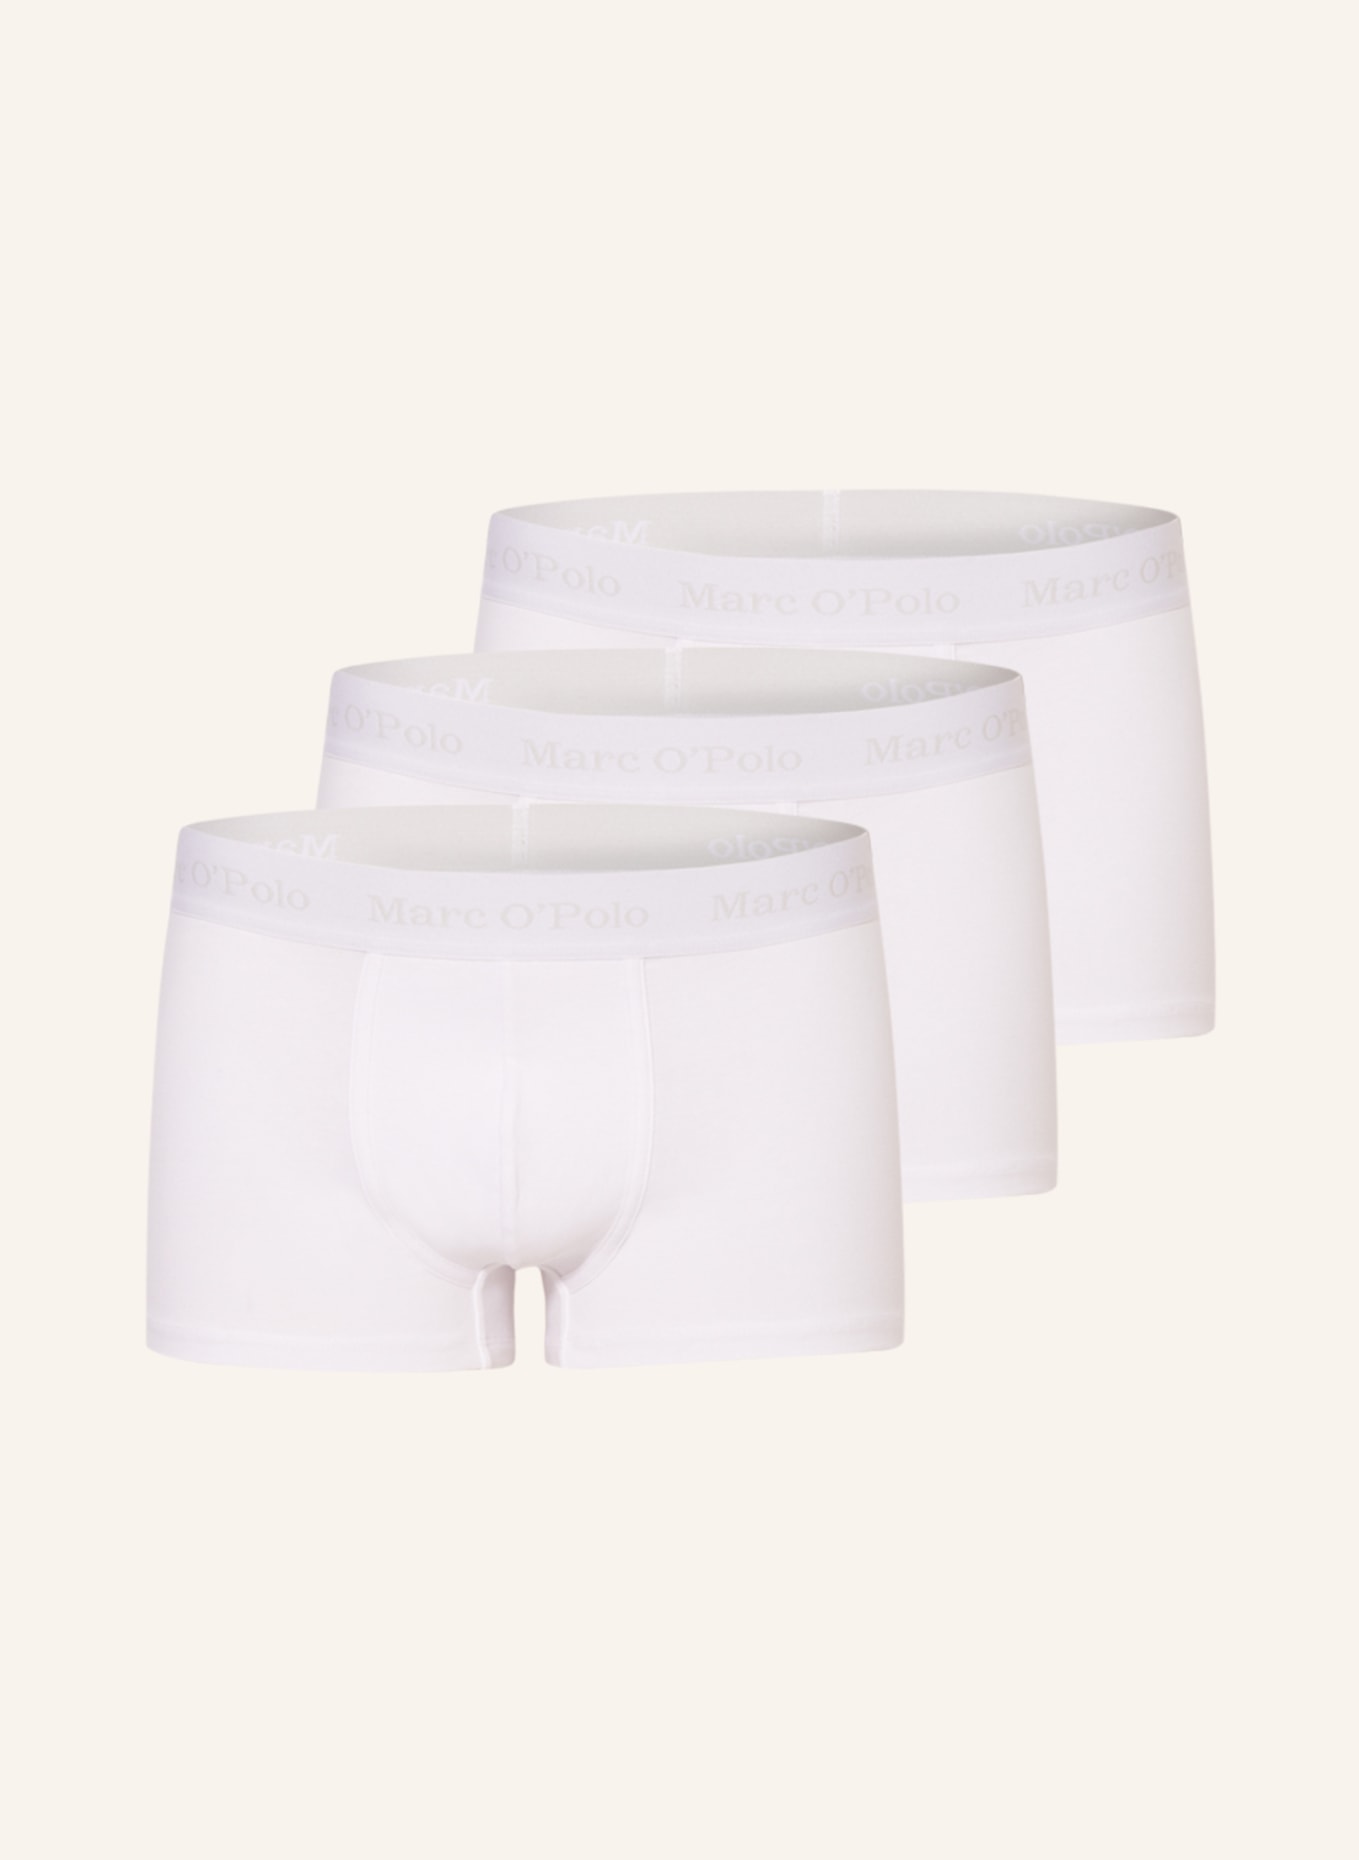 Marc O'Polo 3er-Pack Boxershorts, Farbe: WEISS (Bild 1)